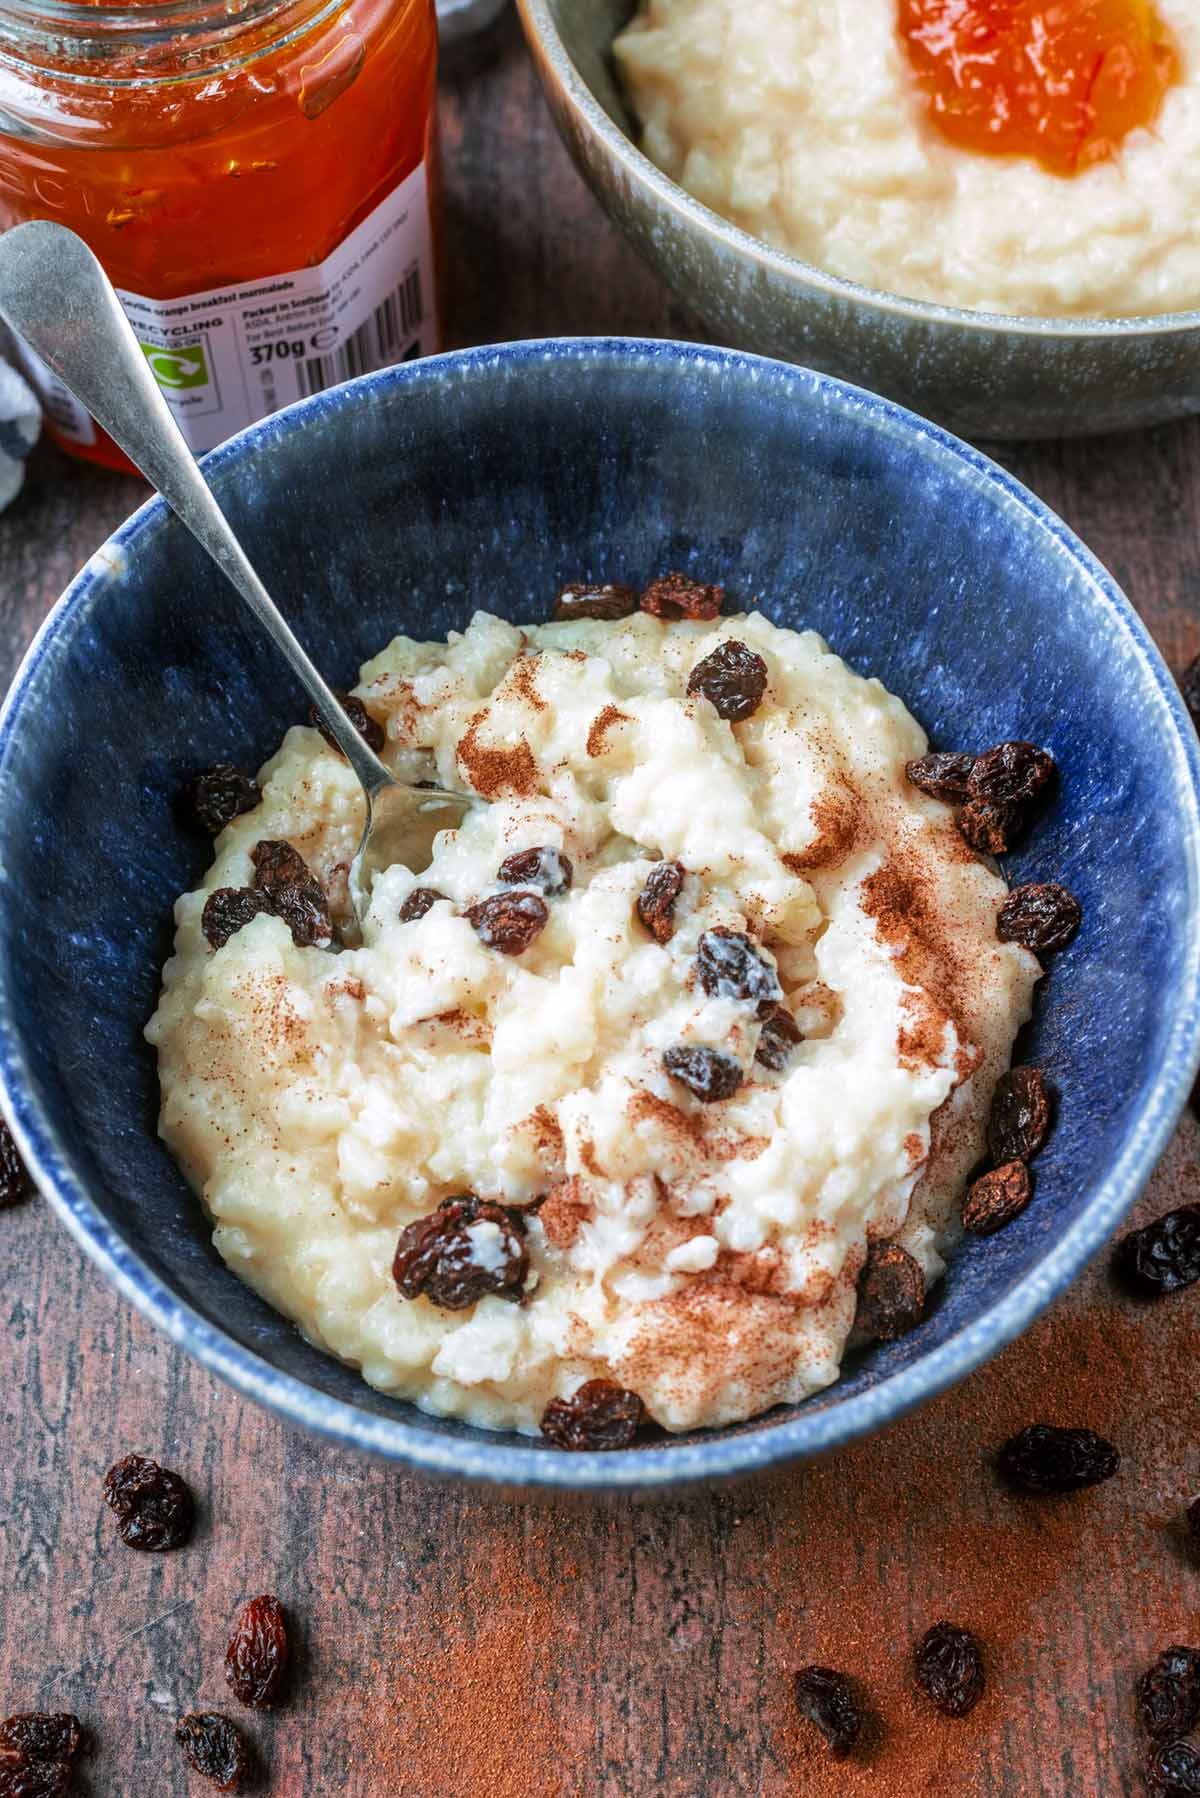 A bowl of rice pudding with raisins mixed into it.